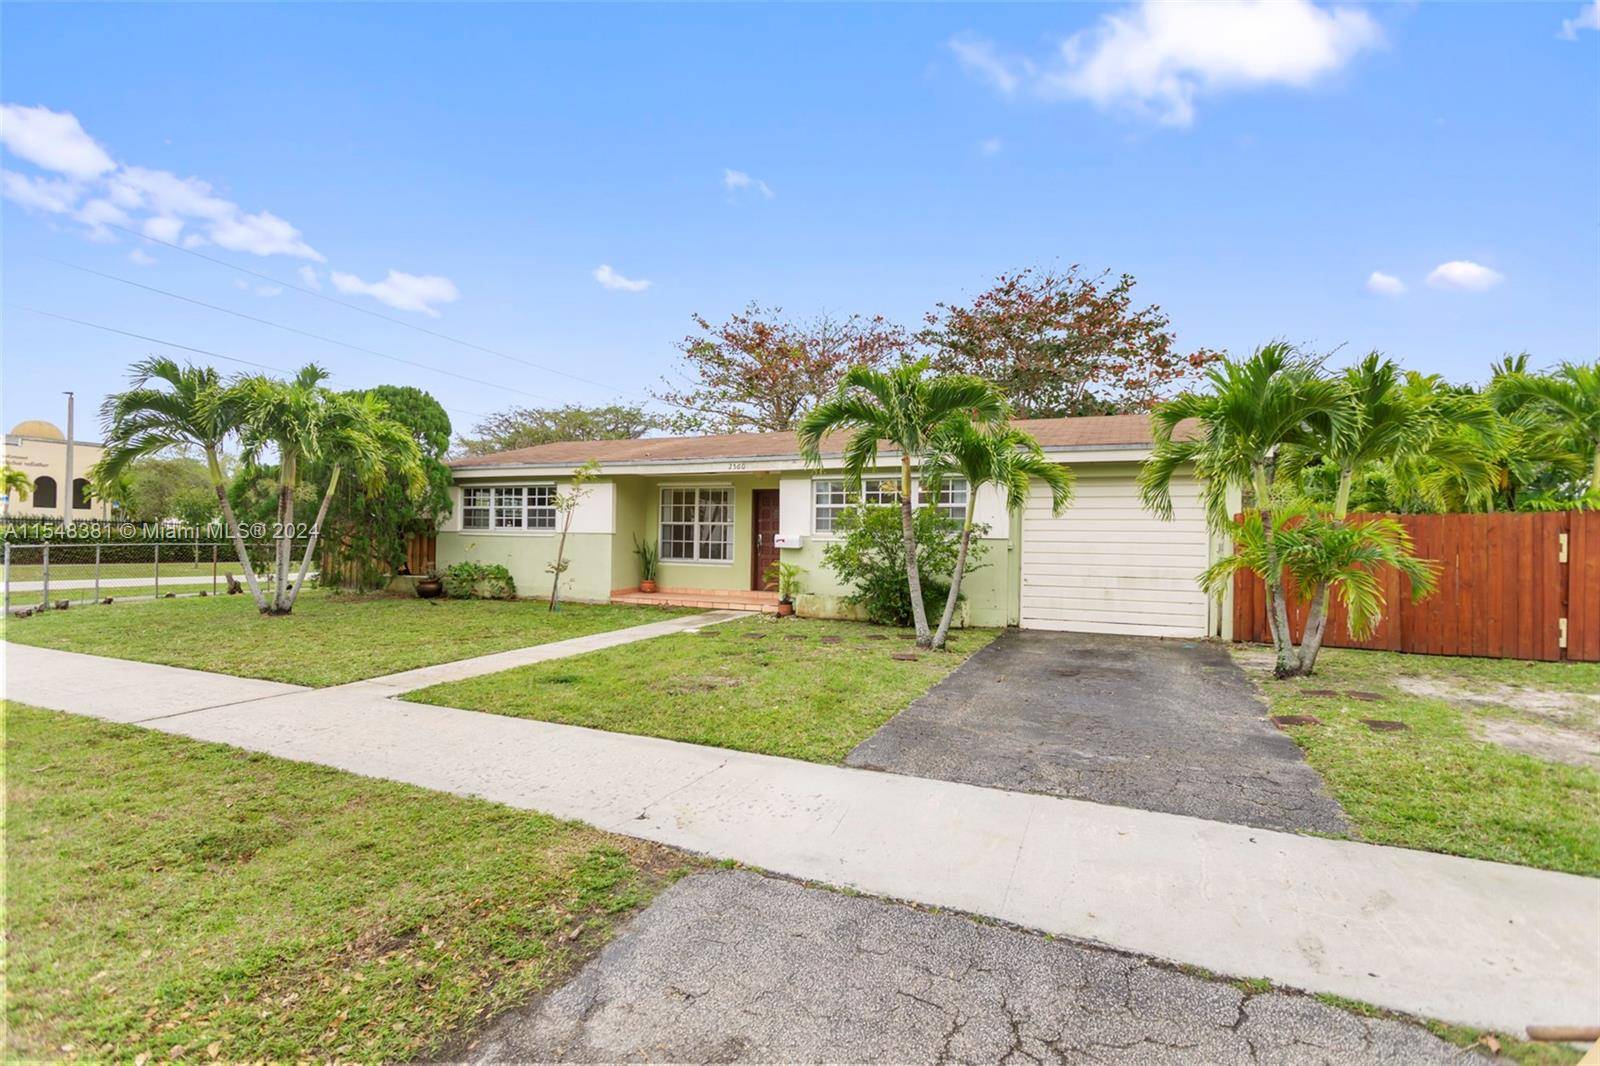 Location is Everything ! An amazing opportunity to own a corner lot in the Heart of NM Aventura.